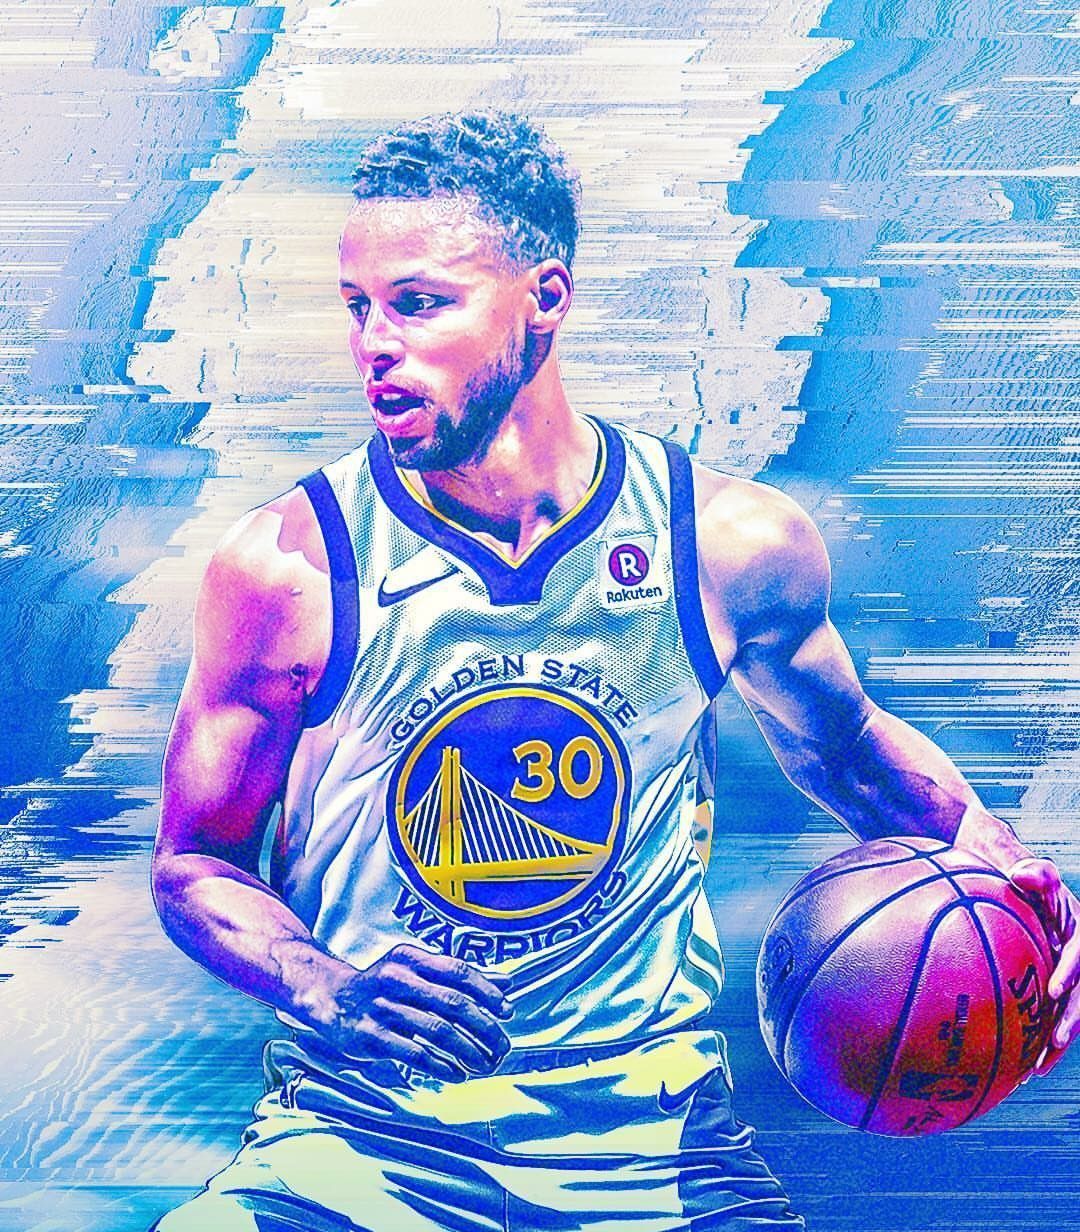 Basketball Players Stephen Curry Wallpaper